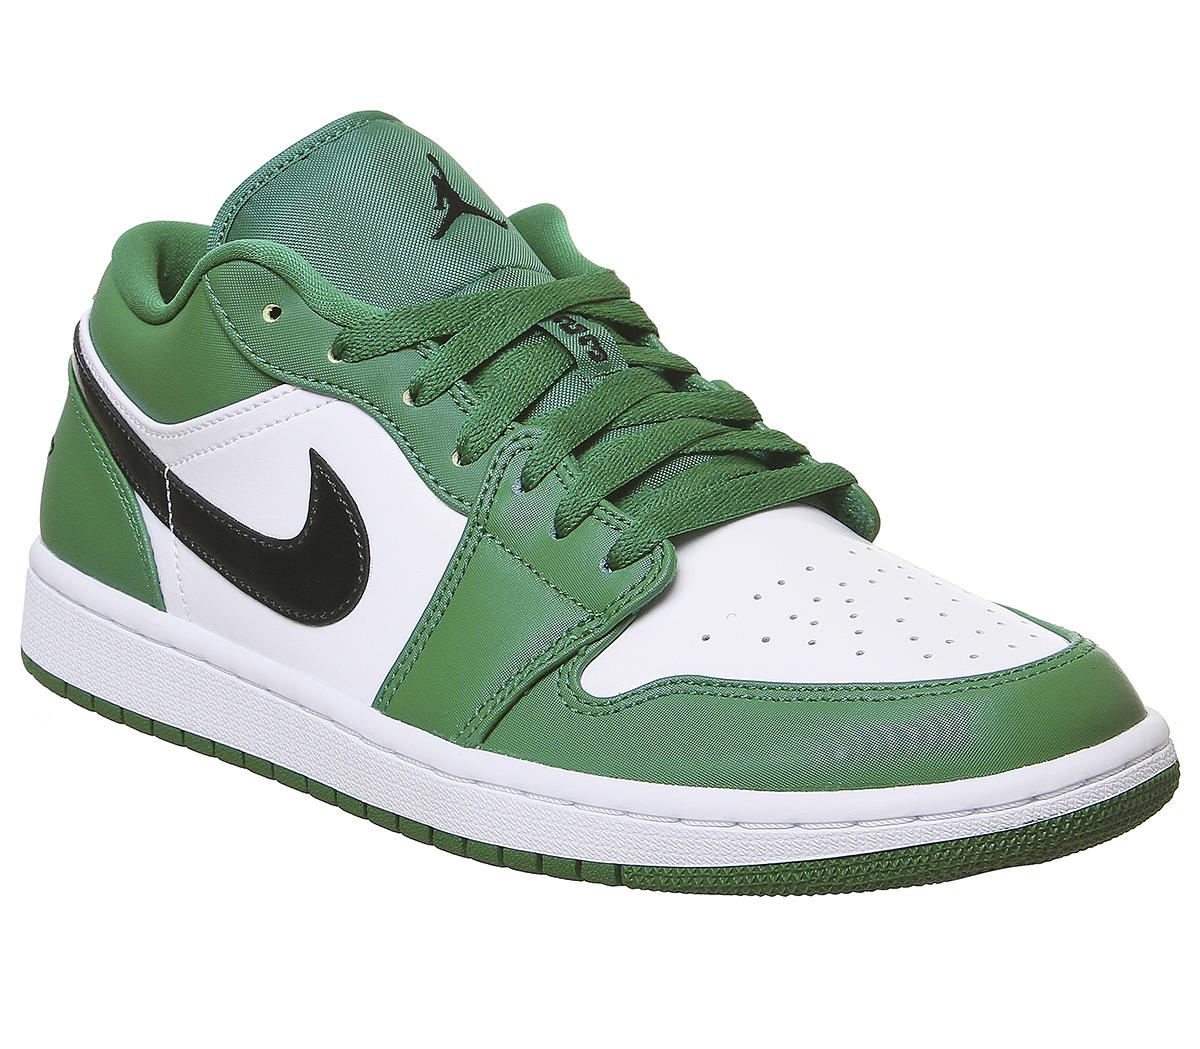 green and white jordans low